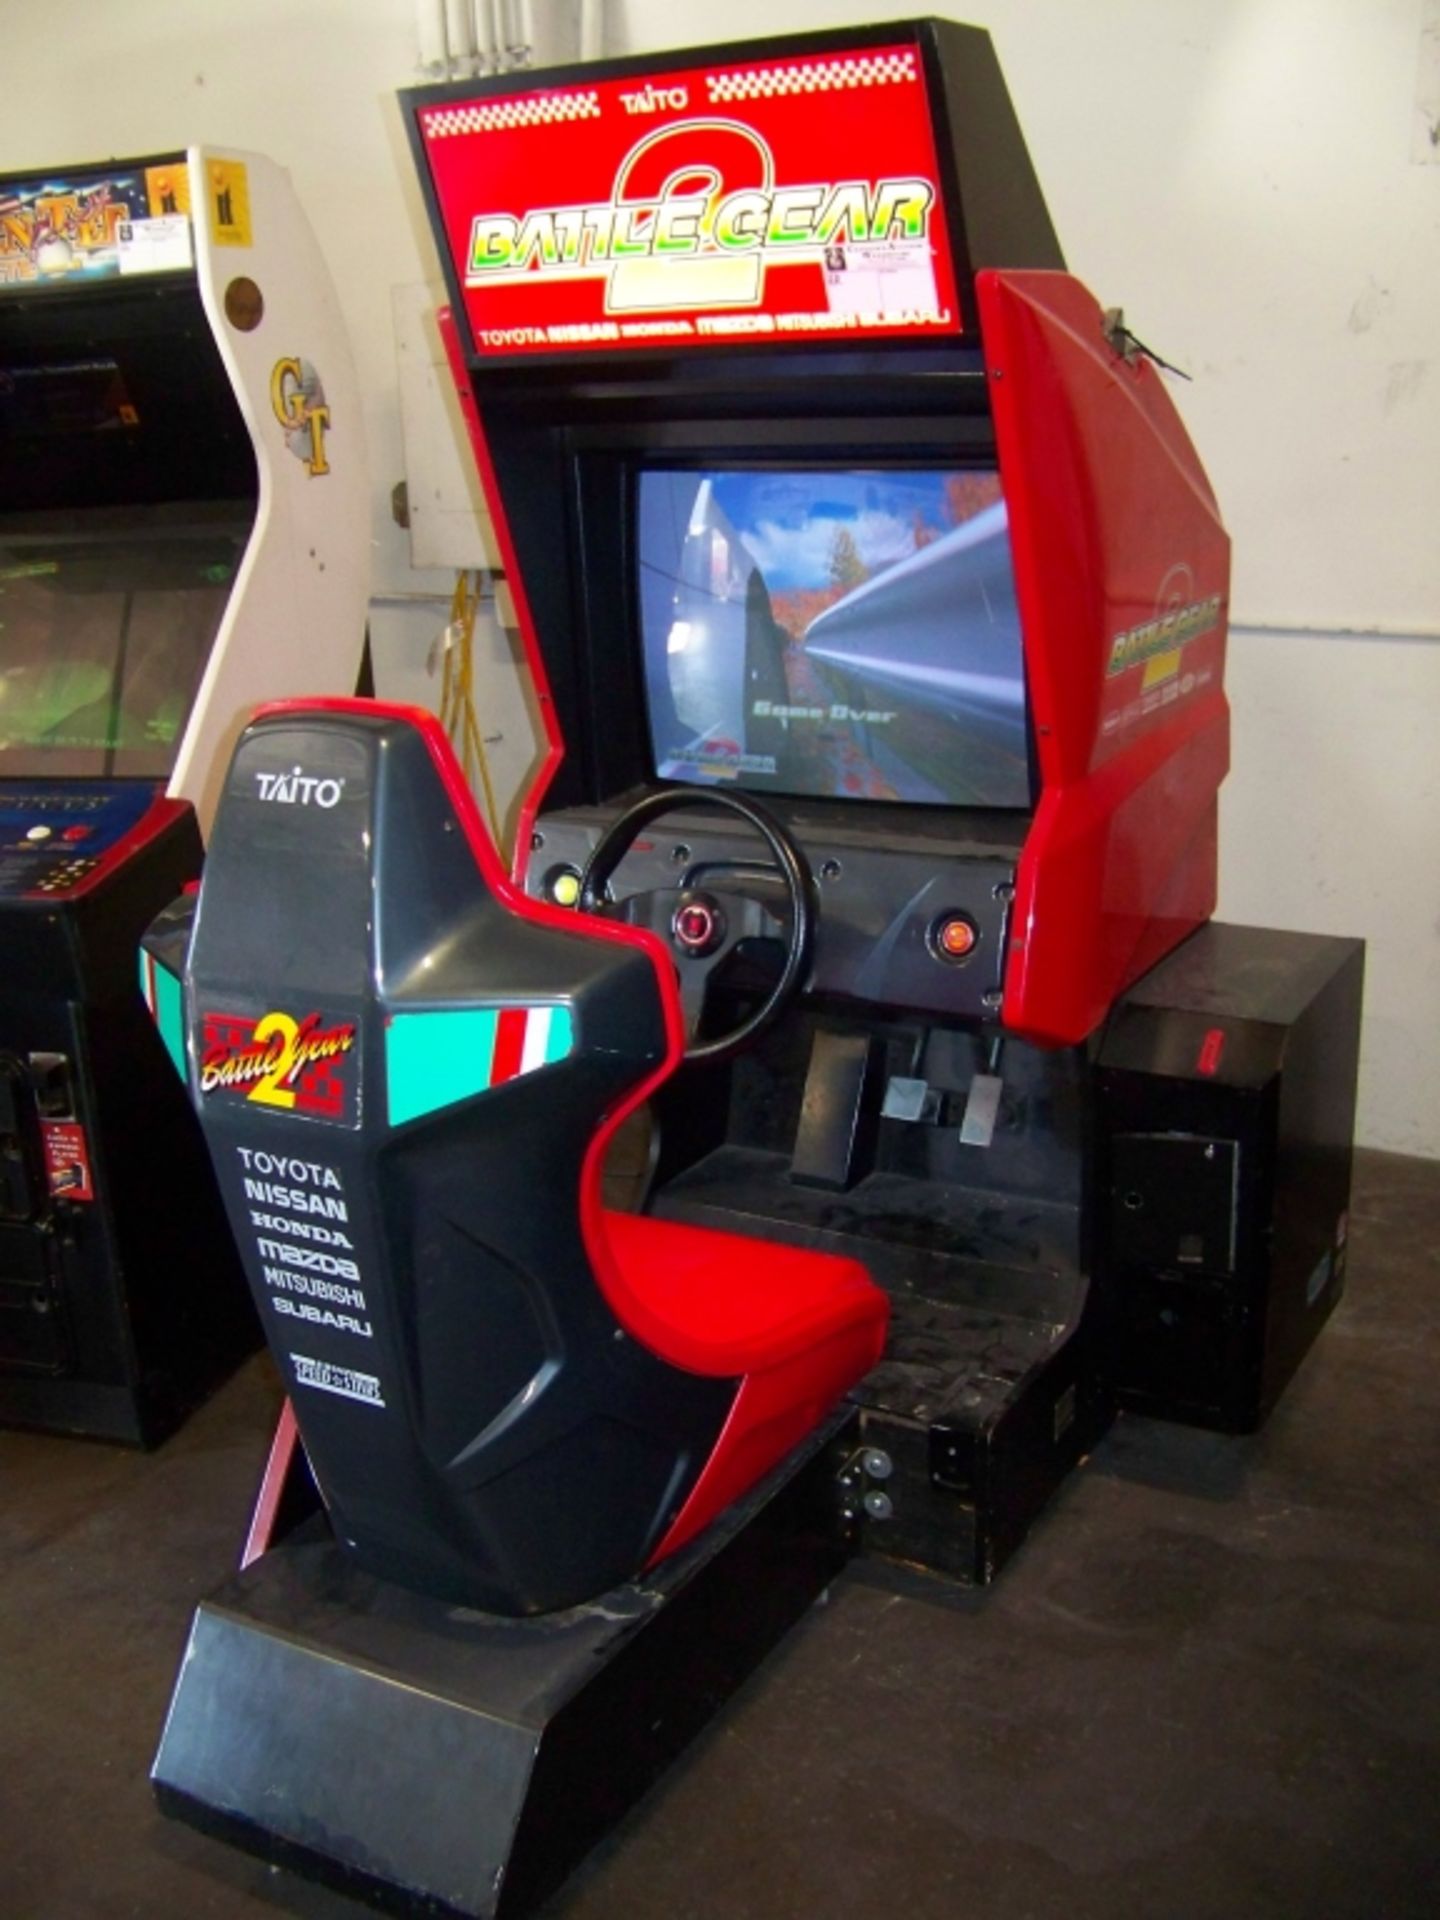 BATTLE GEAR 2 SINGLE SEAT RACING ARCADE GAME TAITO - Image 2 of 4